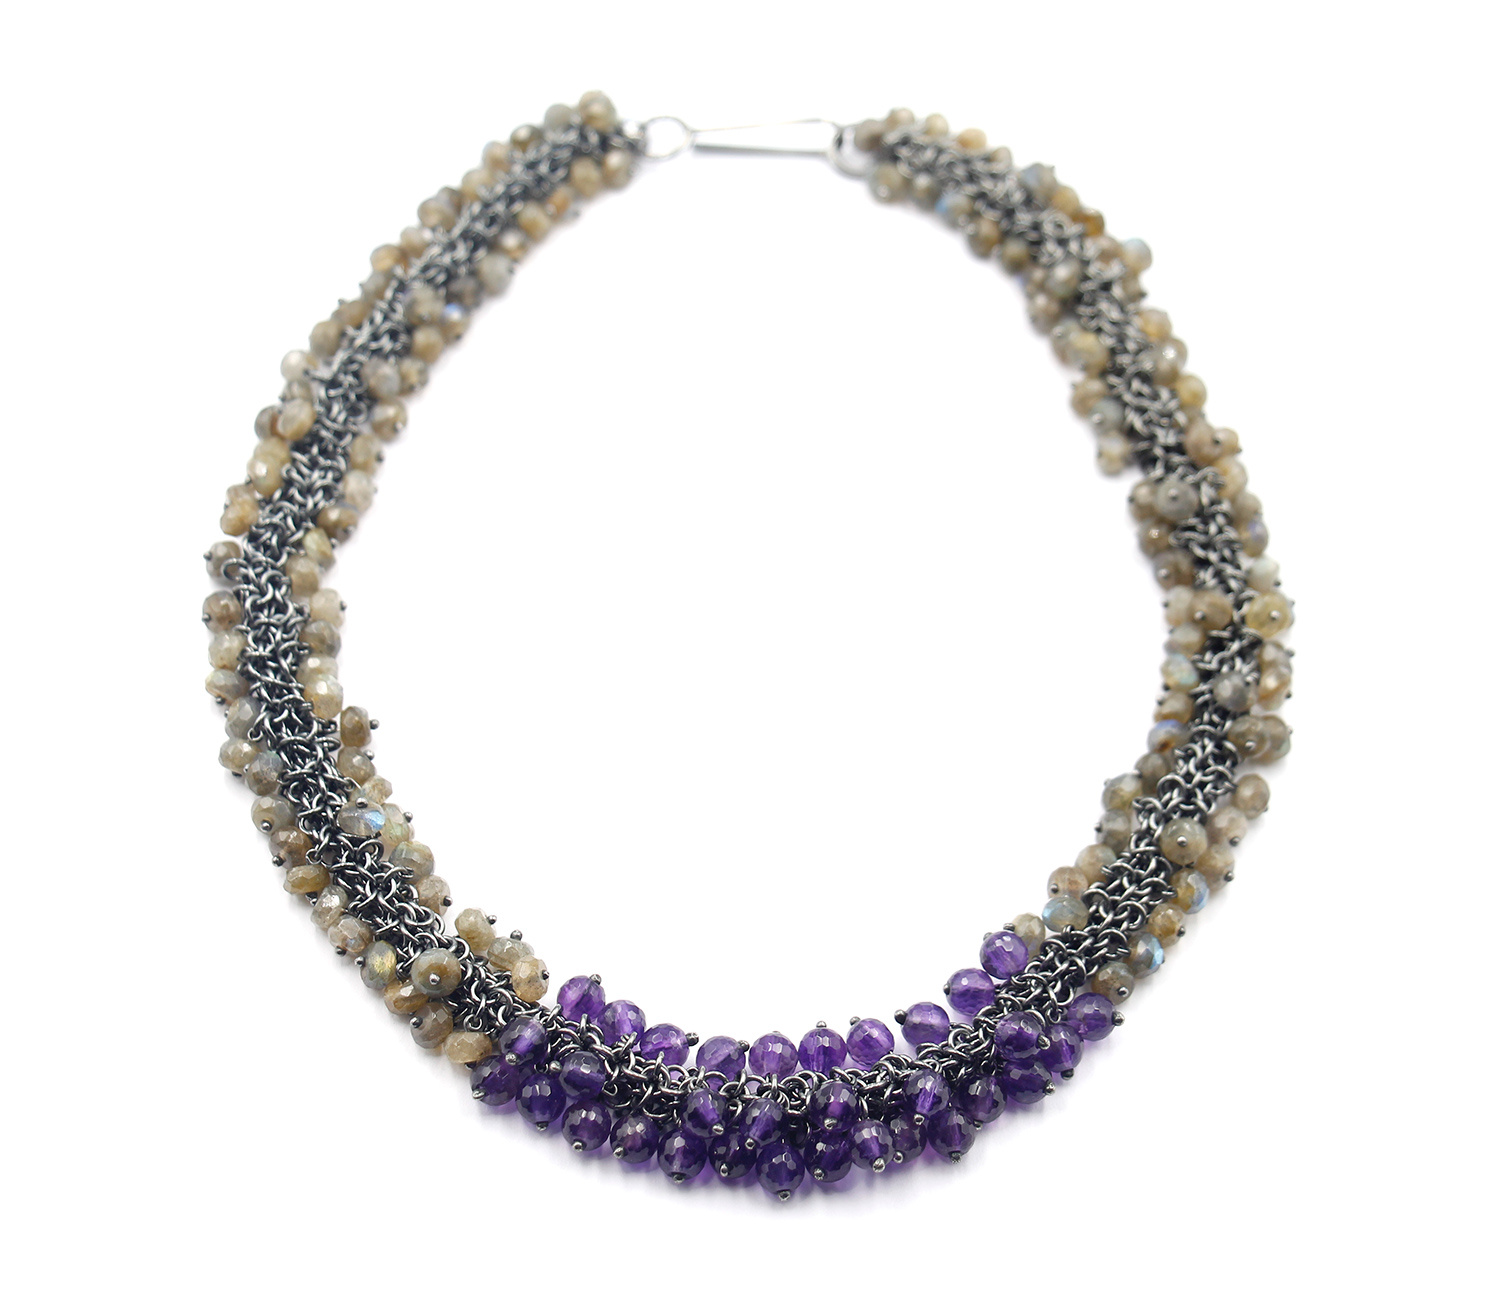 Necklace by Alison Evans